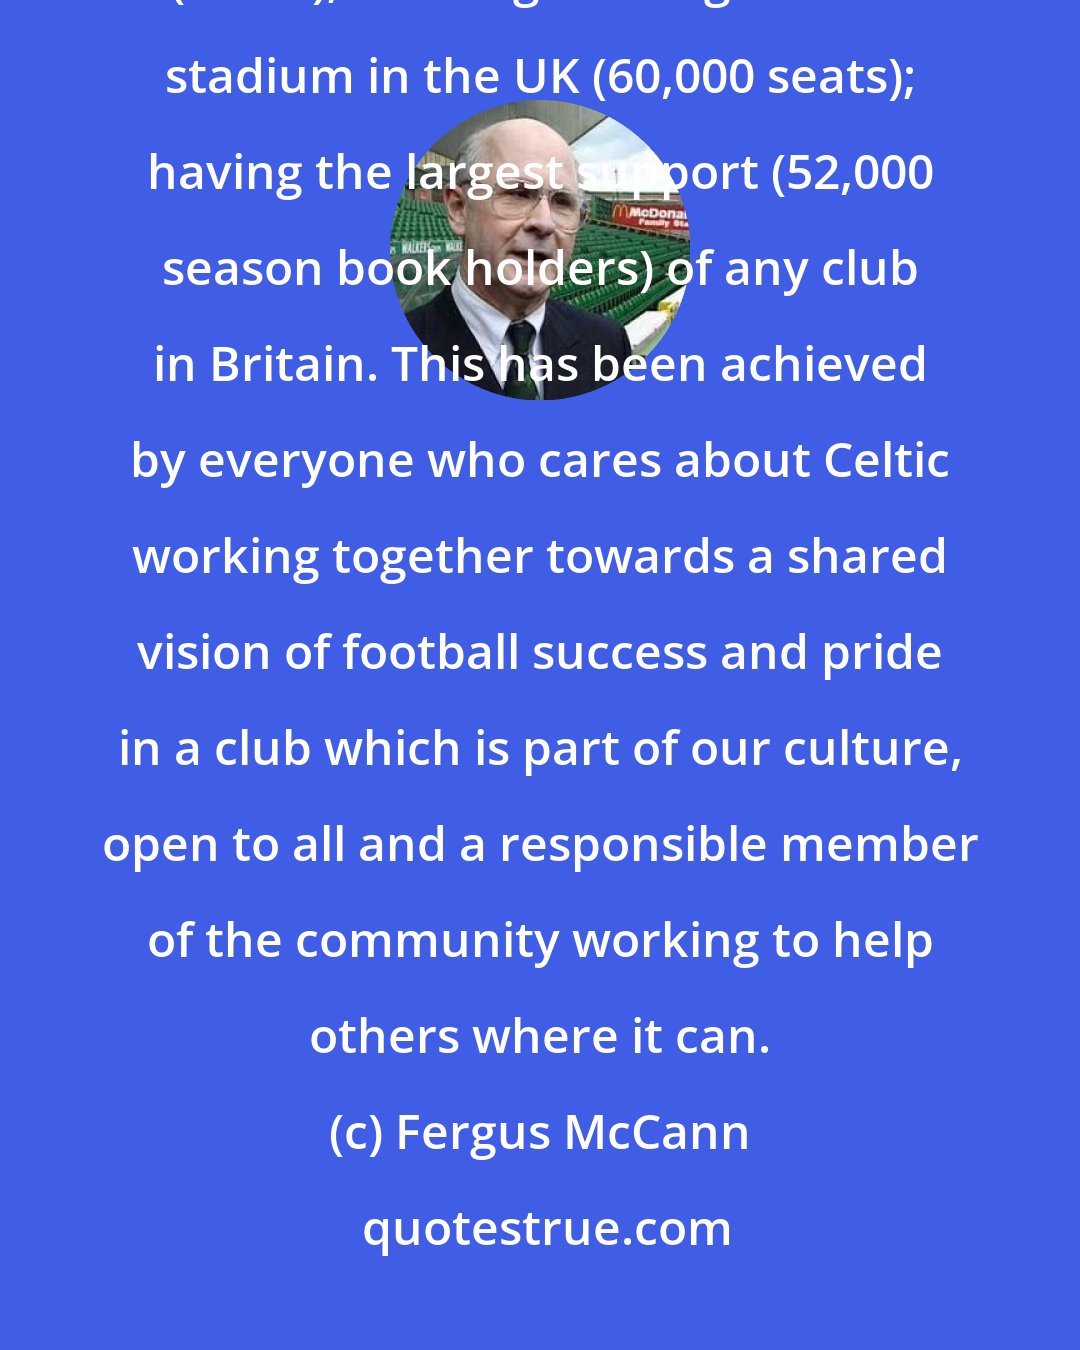 Fergus McCann: Over the four years we have made massive progress: winning the League Championship (97/98); building the largest club stadium in the UK (60,000 seats); having the largest support (52,000 season book holders) of any club in Britain. This has been achieved by everyone who cares about Celtic working together towards a shared vision of football success and pride in a club which is part of our culture, open to all and a responsible member of the community working to help others where it can.